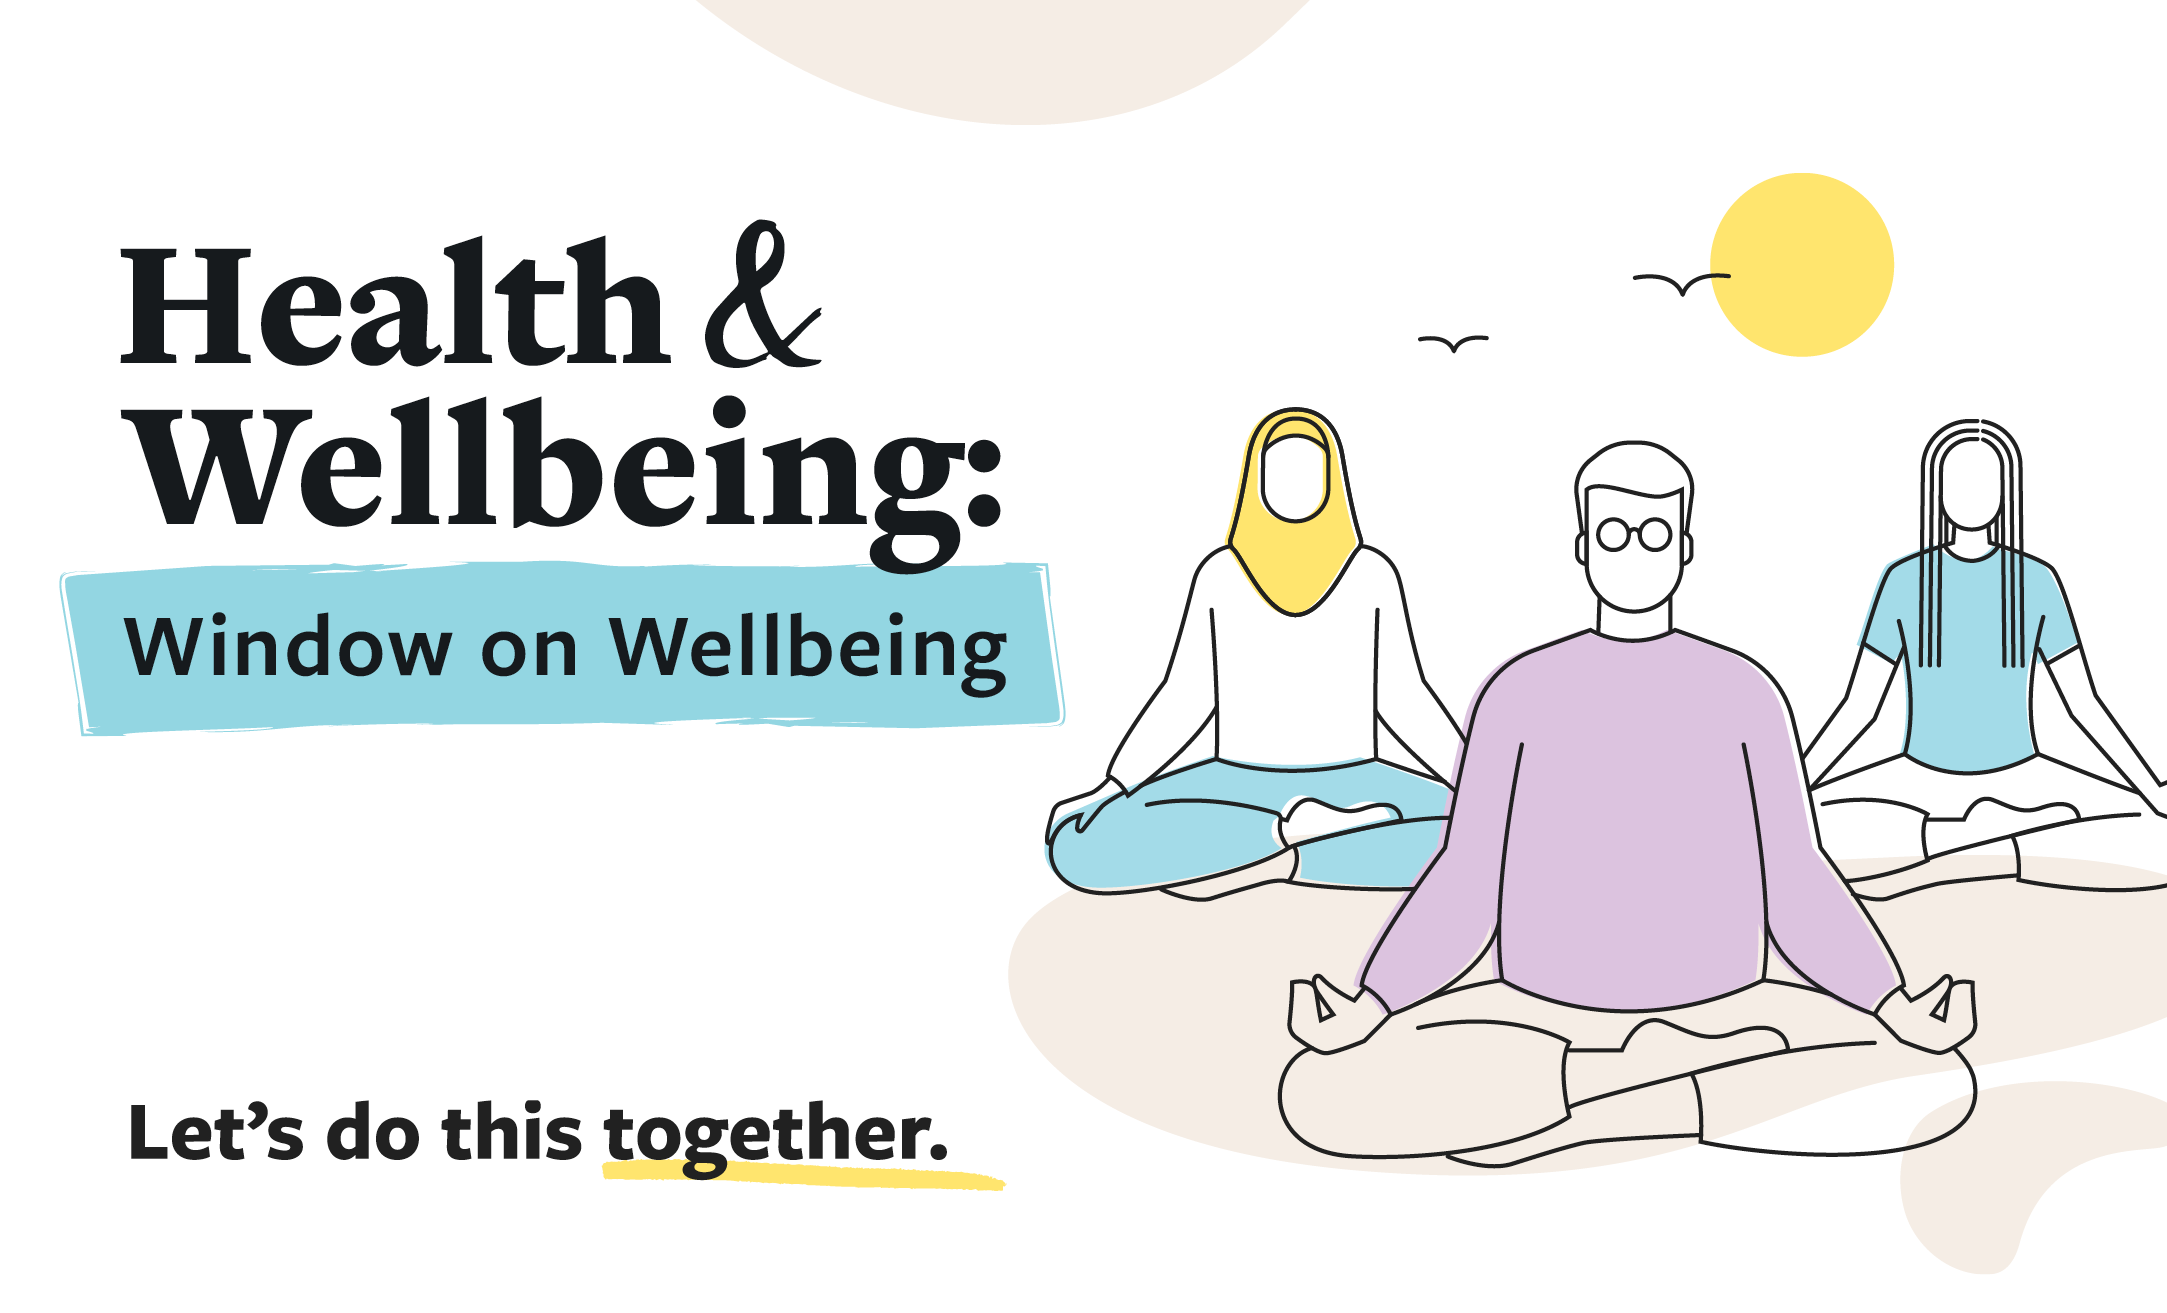 Health and Wellbeing, lets do this together. Illustration of 3 people meditating